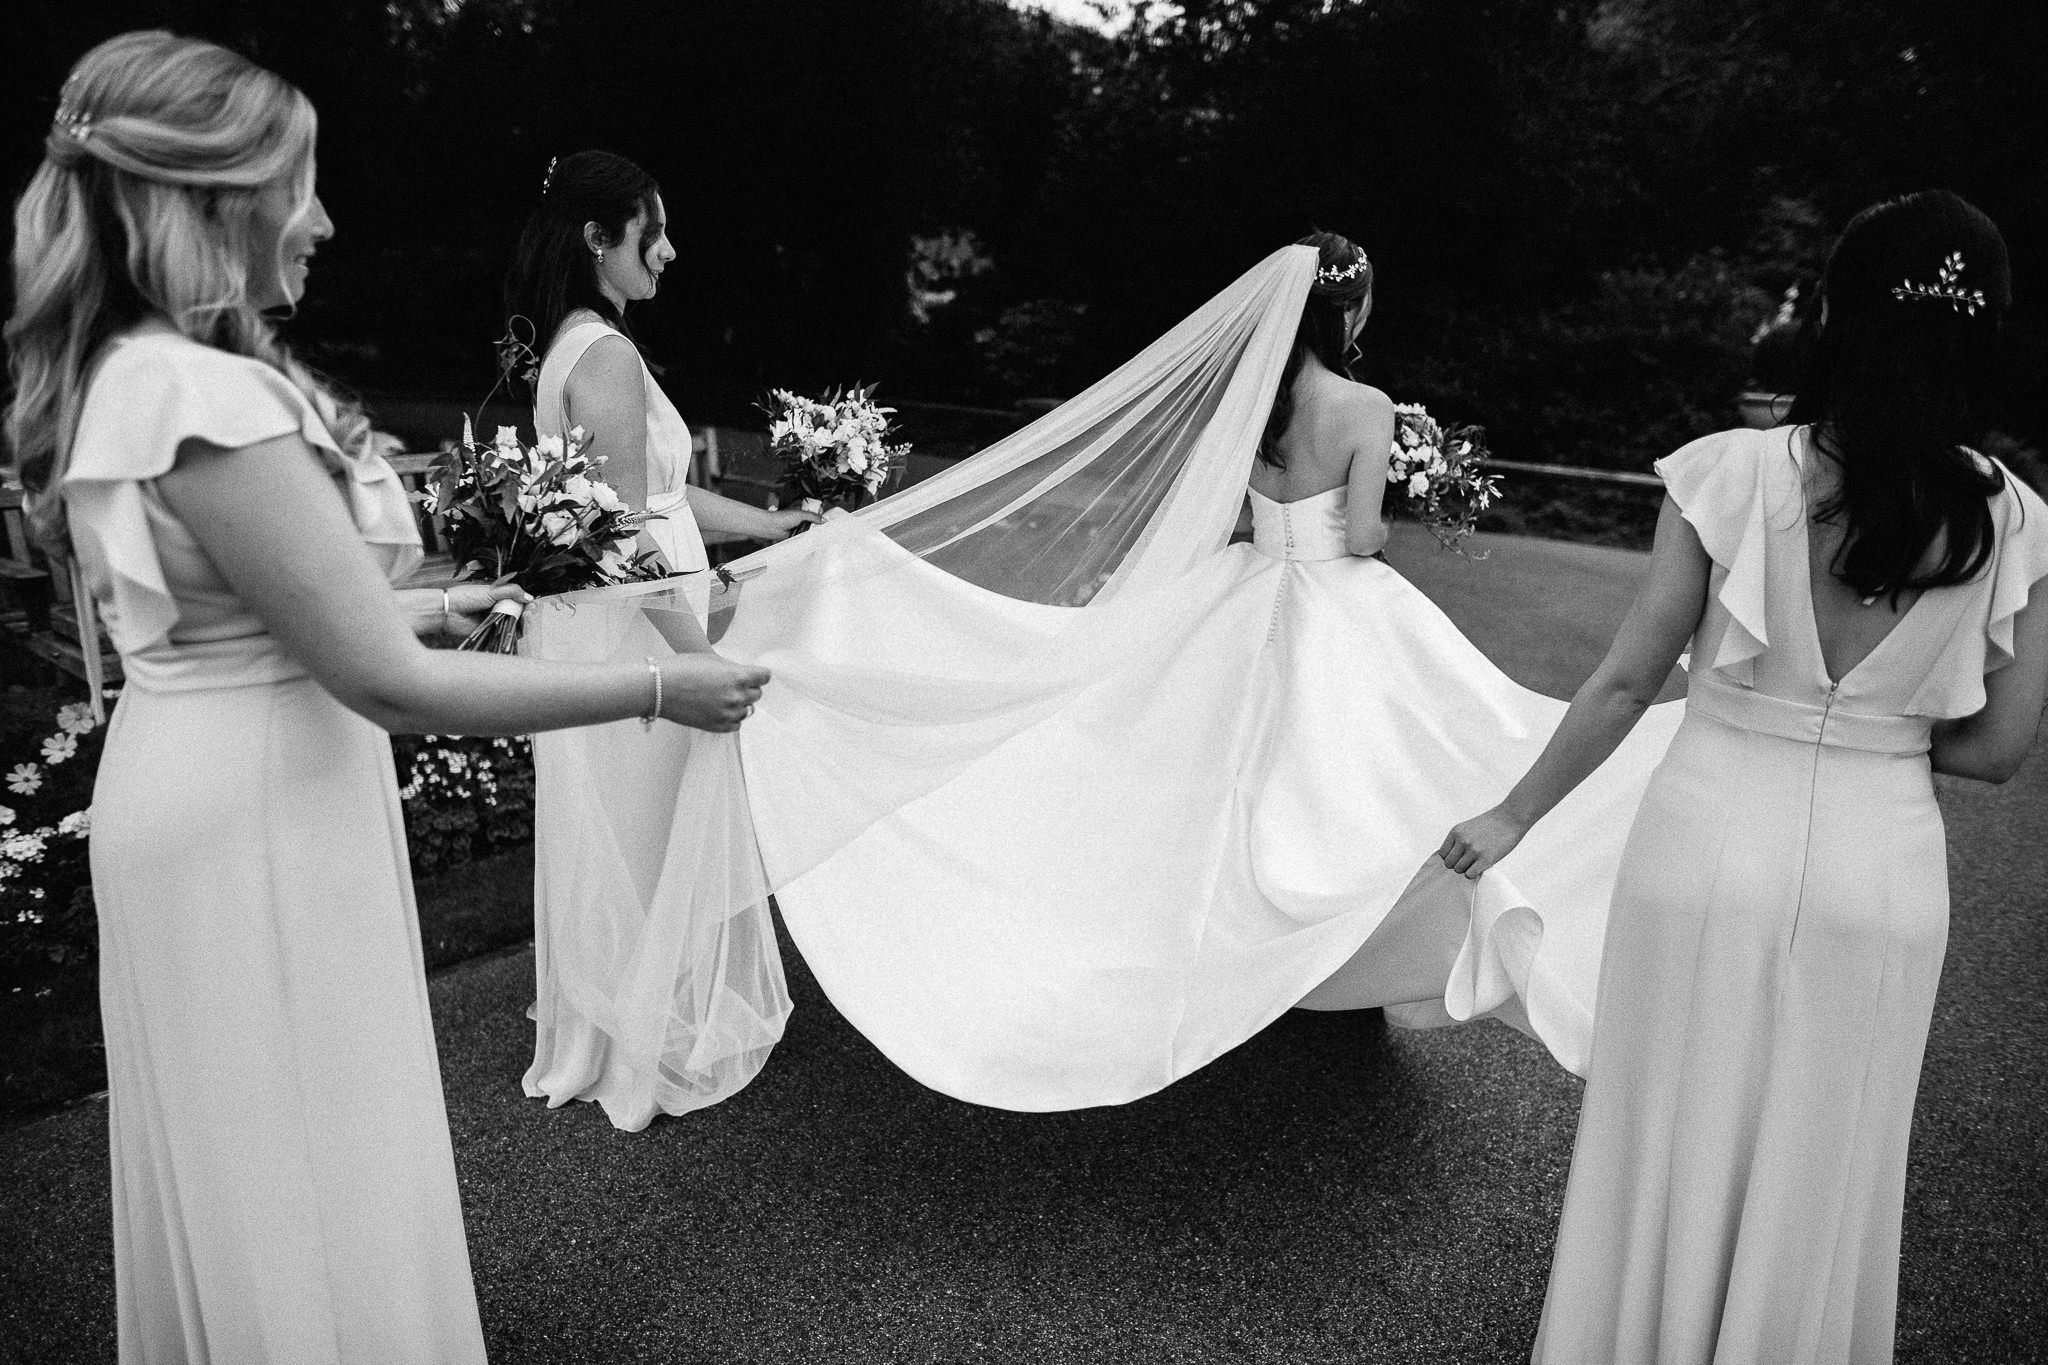  Bridesmaids carry the wedding dress train of the Bride at The Hurlingham Club  